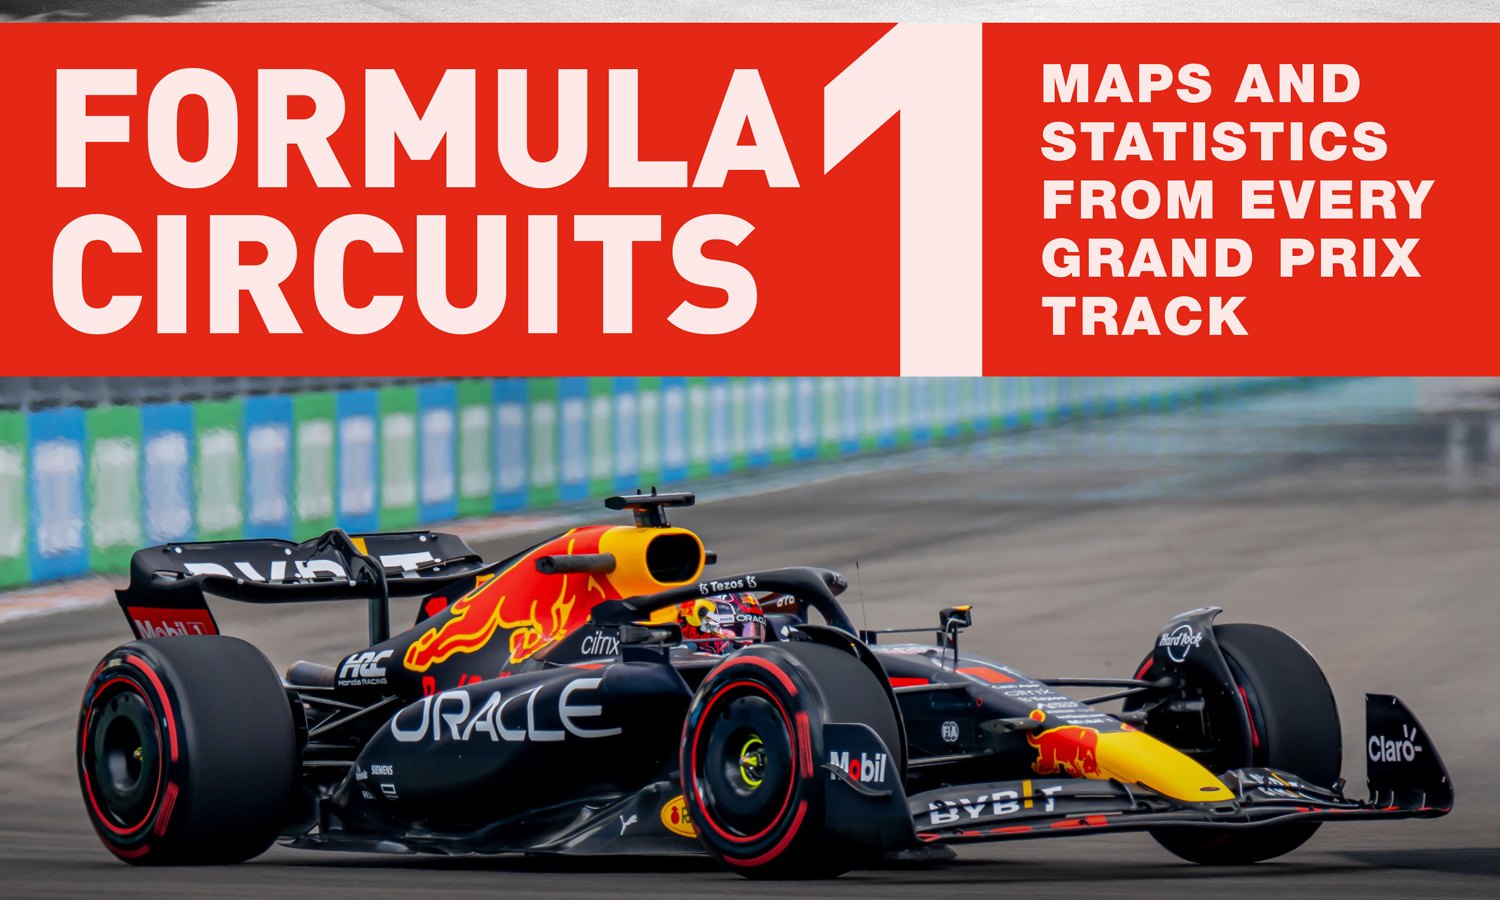 The cover of Formula 1 Circuits: Maps and statistics from every Grand Prix track.